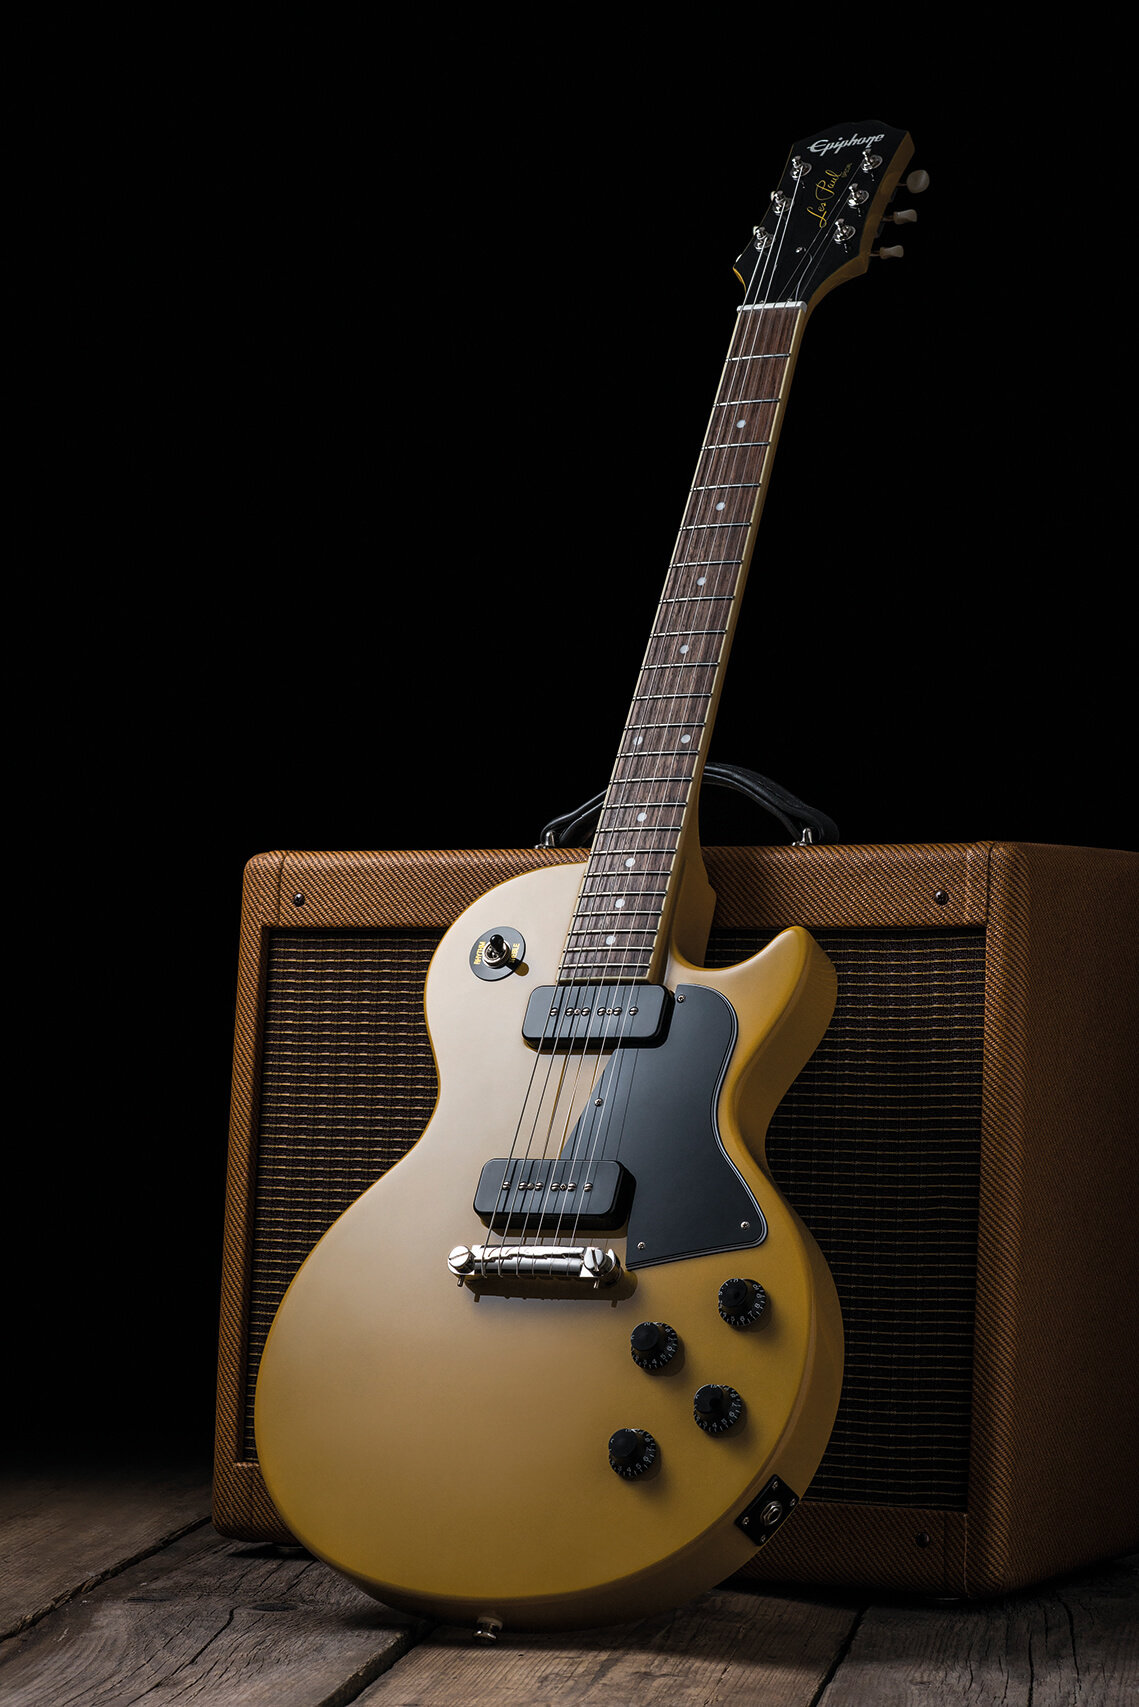 The Big Review: Epiphone Inspired By Gibson Les Paul Special, Les